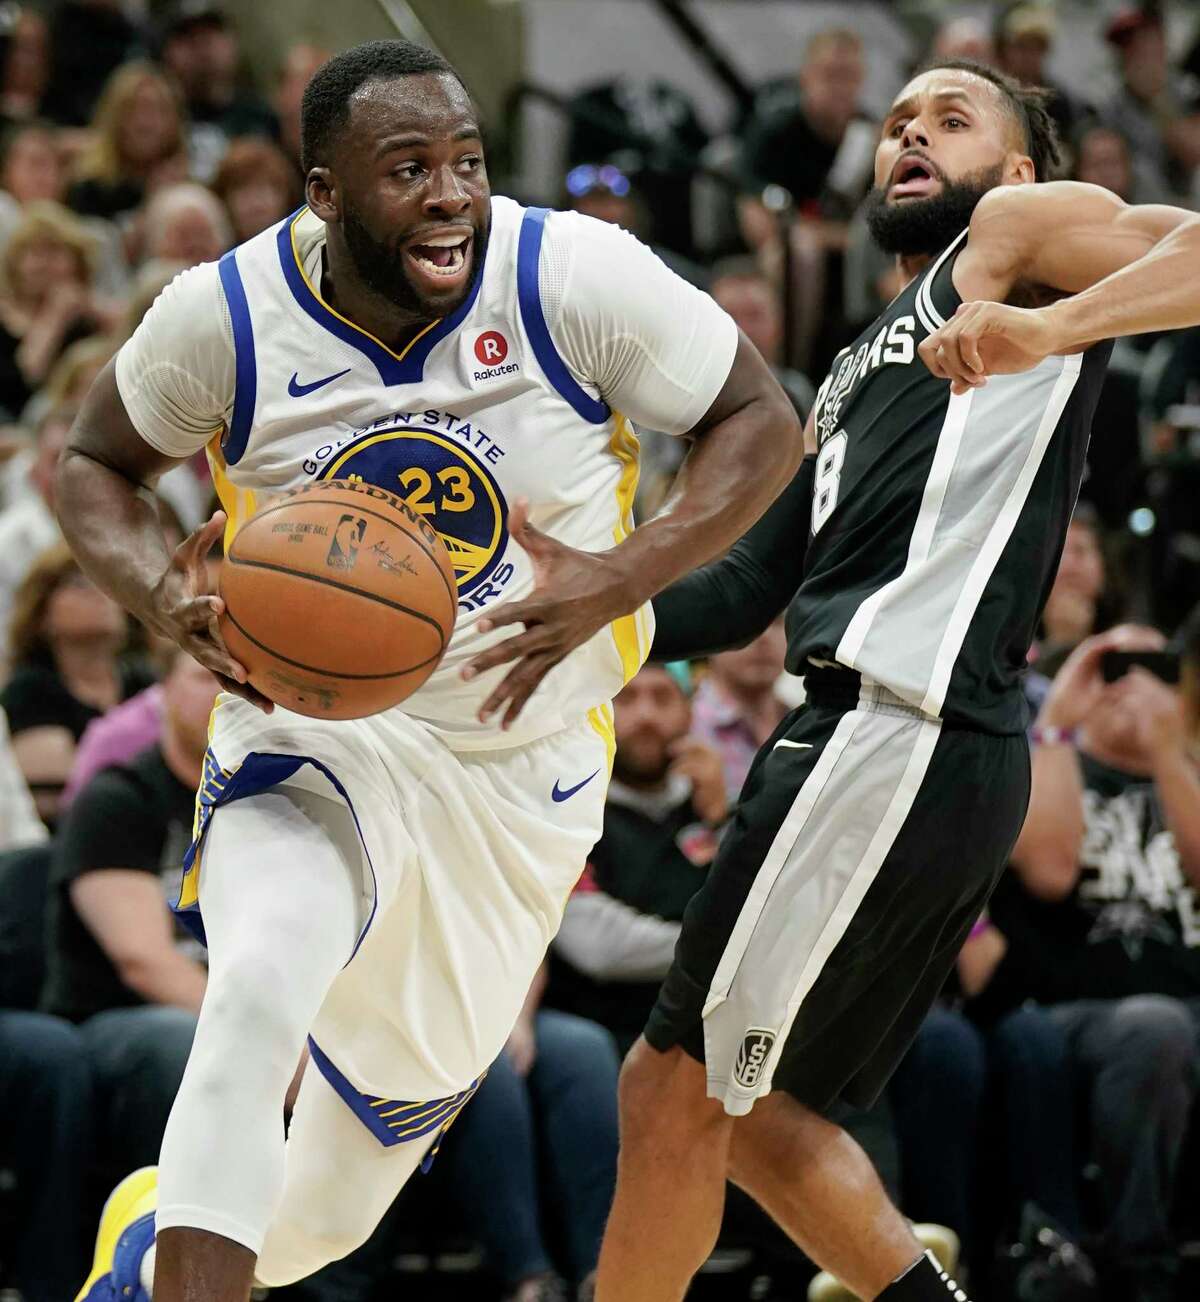 Golden State Warriors' Draymond Green (23) drives around San Antonio Spurs' Patty Mills during the first half of Game 4 of a first-round NBA basketball playoff series in San Antonio, Sunday, April 22, 2018, in San Antonio. (AP Photo/Darren Abate)